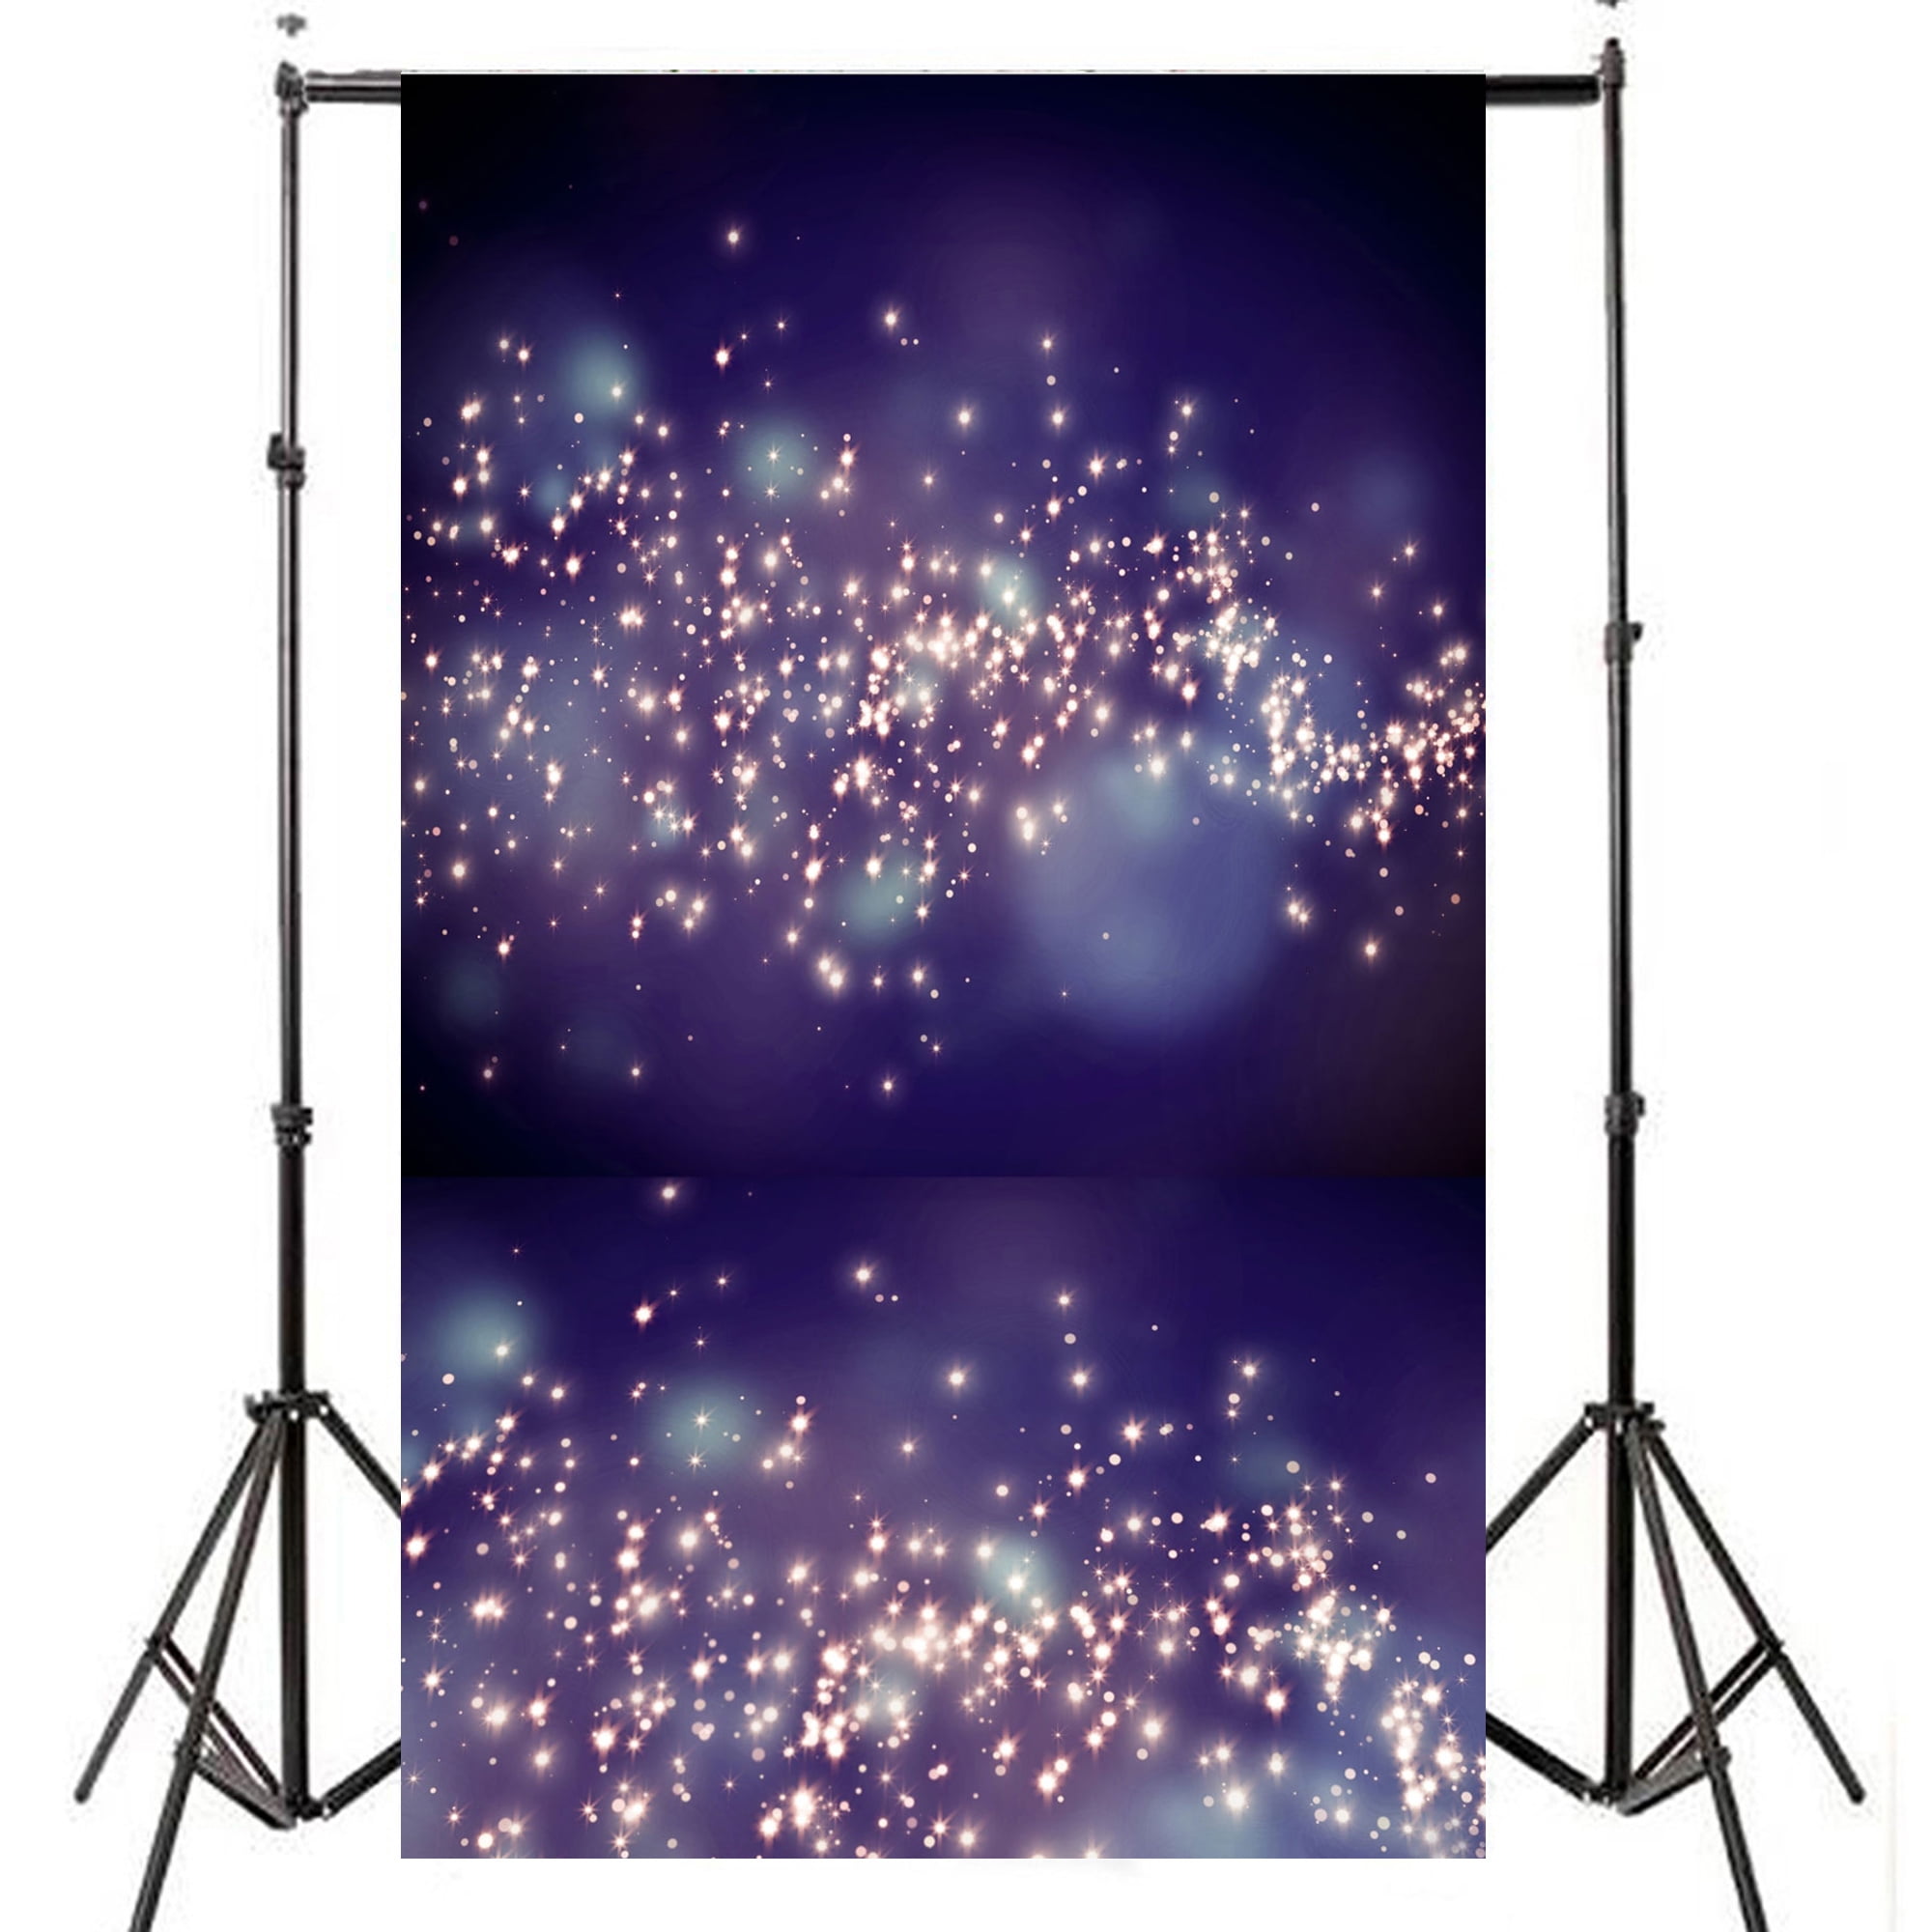 Lelinta 5x7ft-Blue Dreamy Ice World Photography Backdrop Paper Studio Props Background for Baby Wedding Decor 